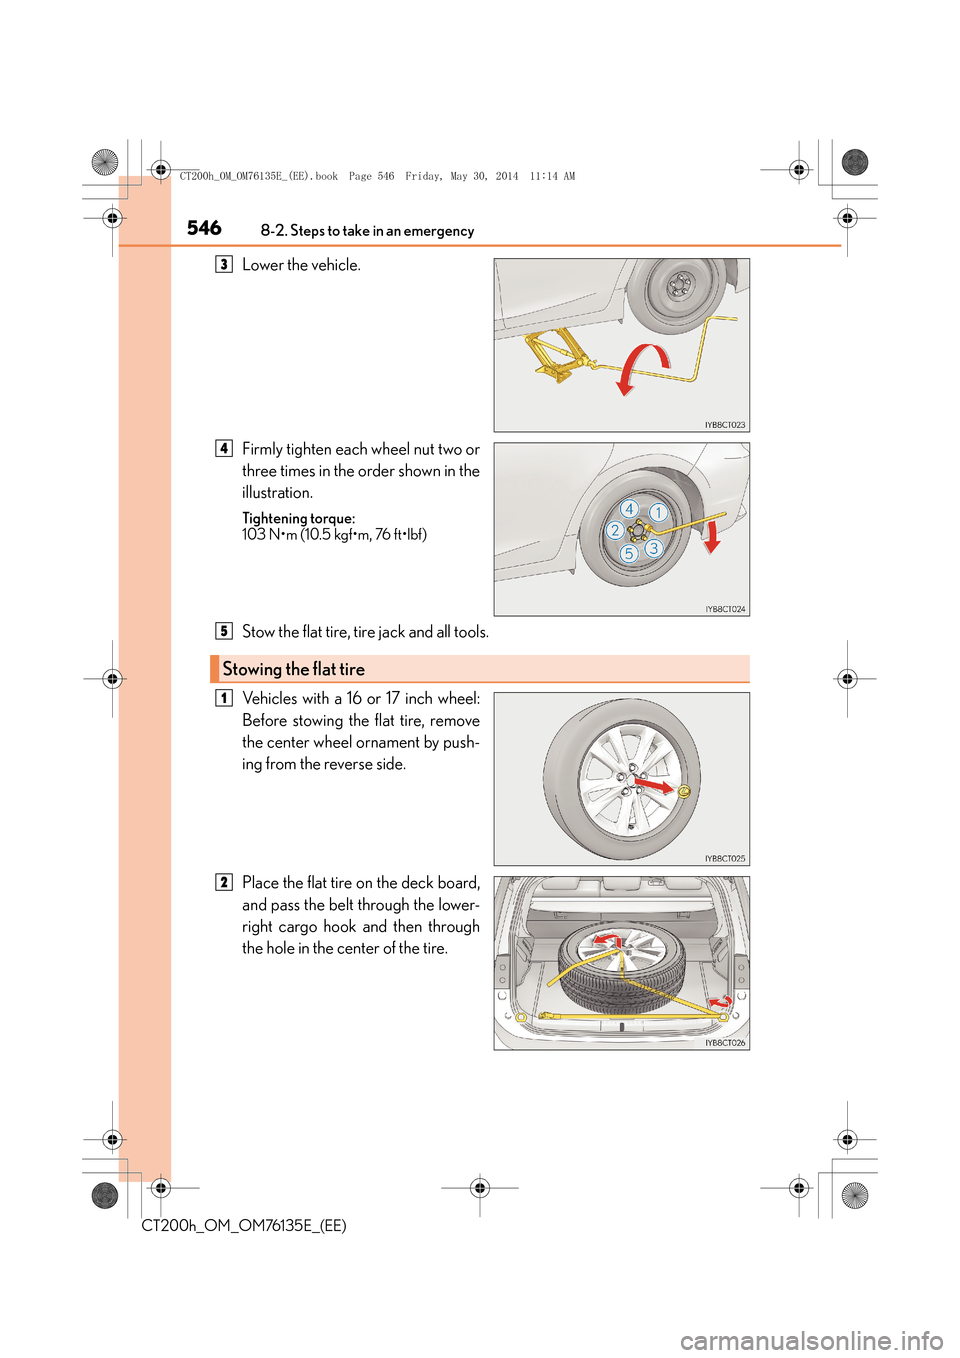 Lexus CT200h 2014  Owners Manual (in English) 5468-2. Steps to take in an emergency
CT200h_OM_OM76135E_(EE)
Lower the vehicle.
Firmly tighten each wheel nut two or
three times in the order shown in the
illustration.
Tightening torque:
103 N•m (